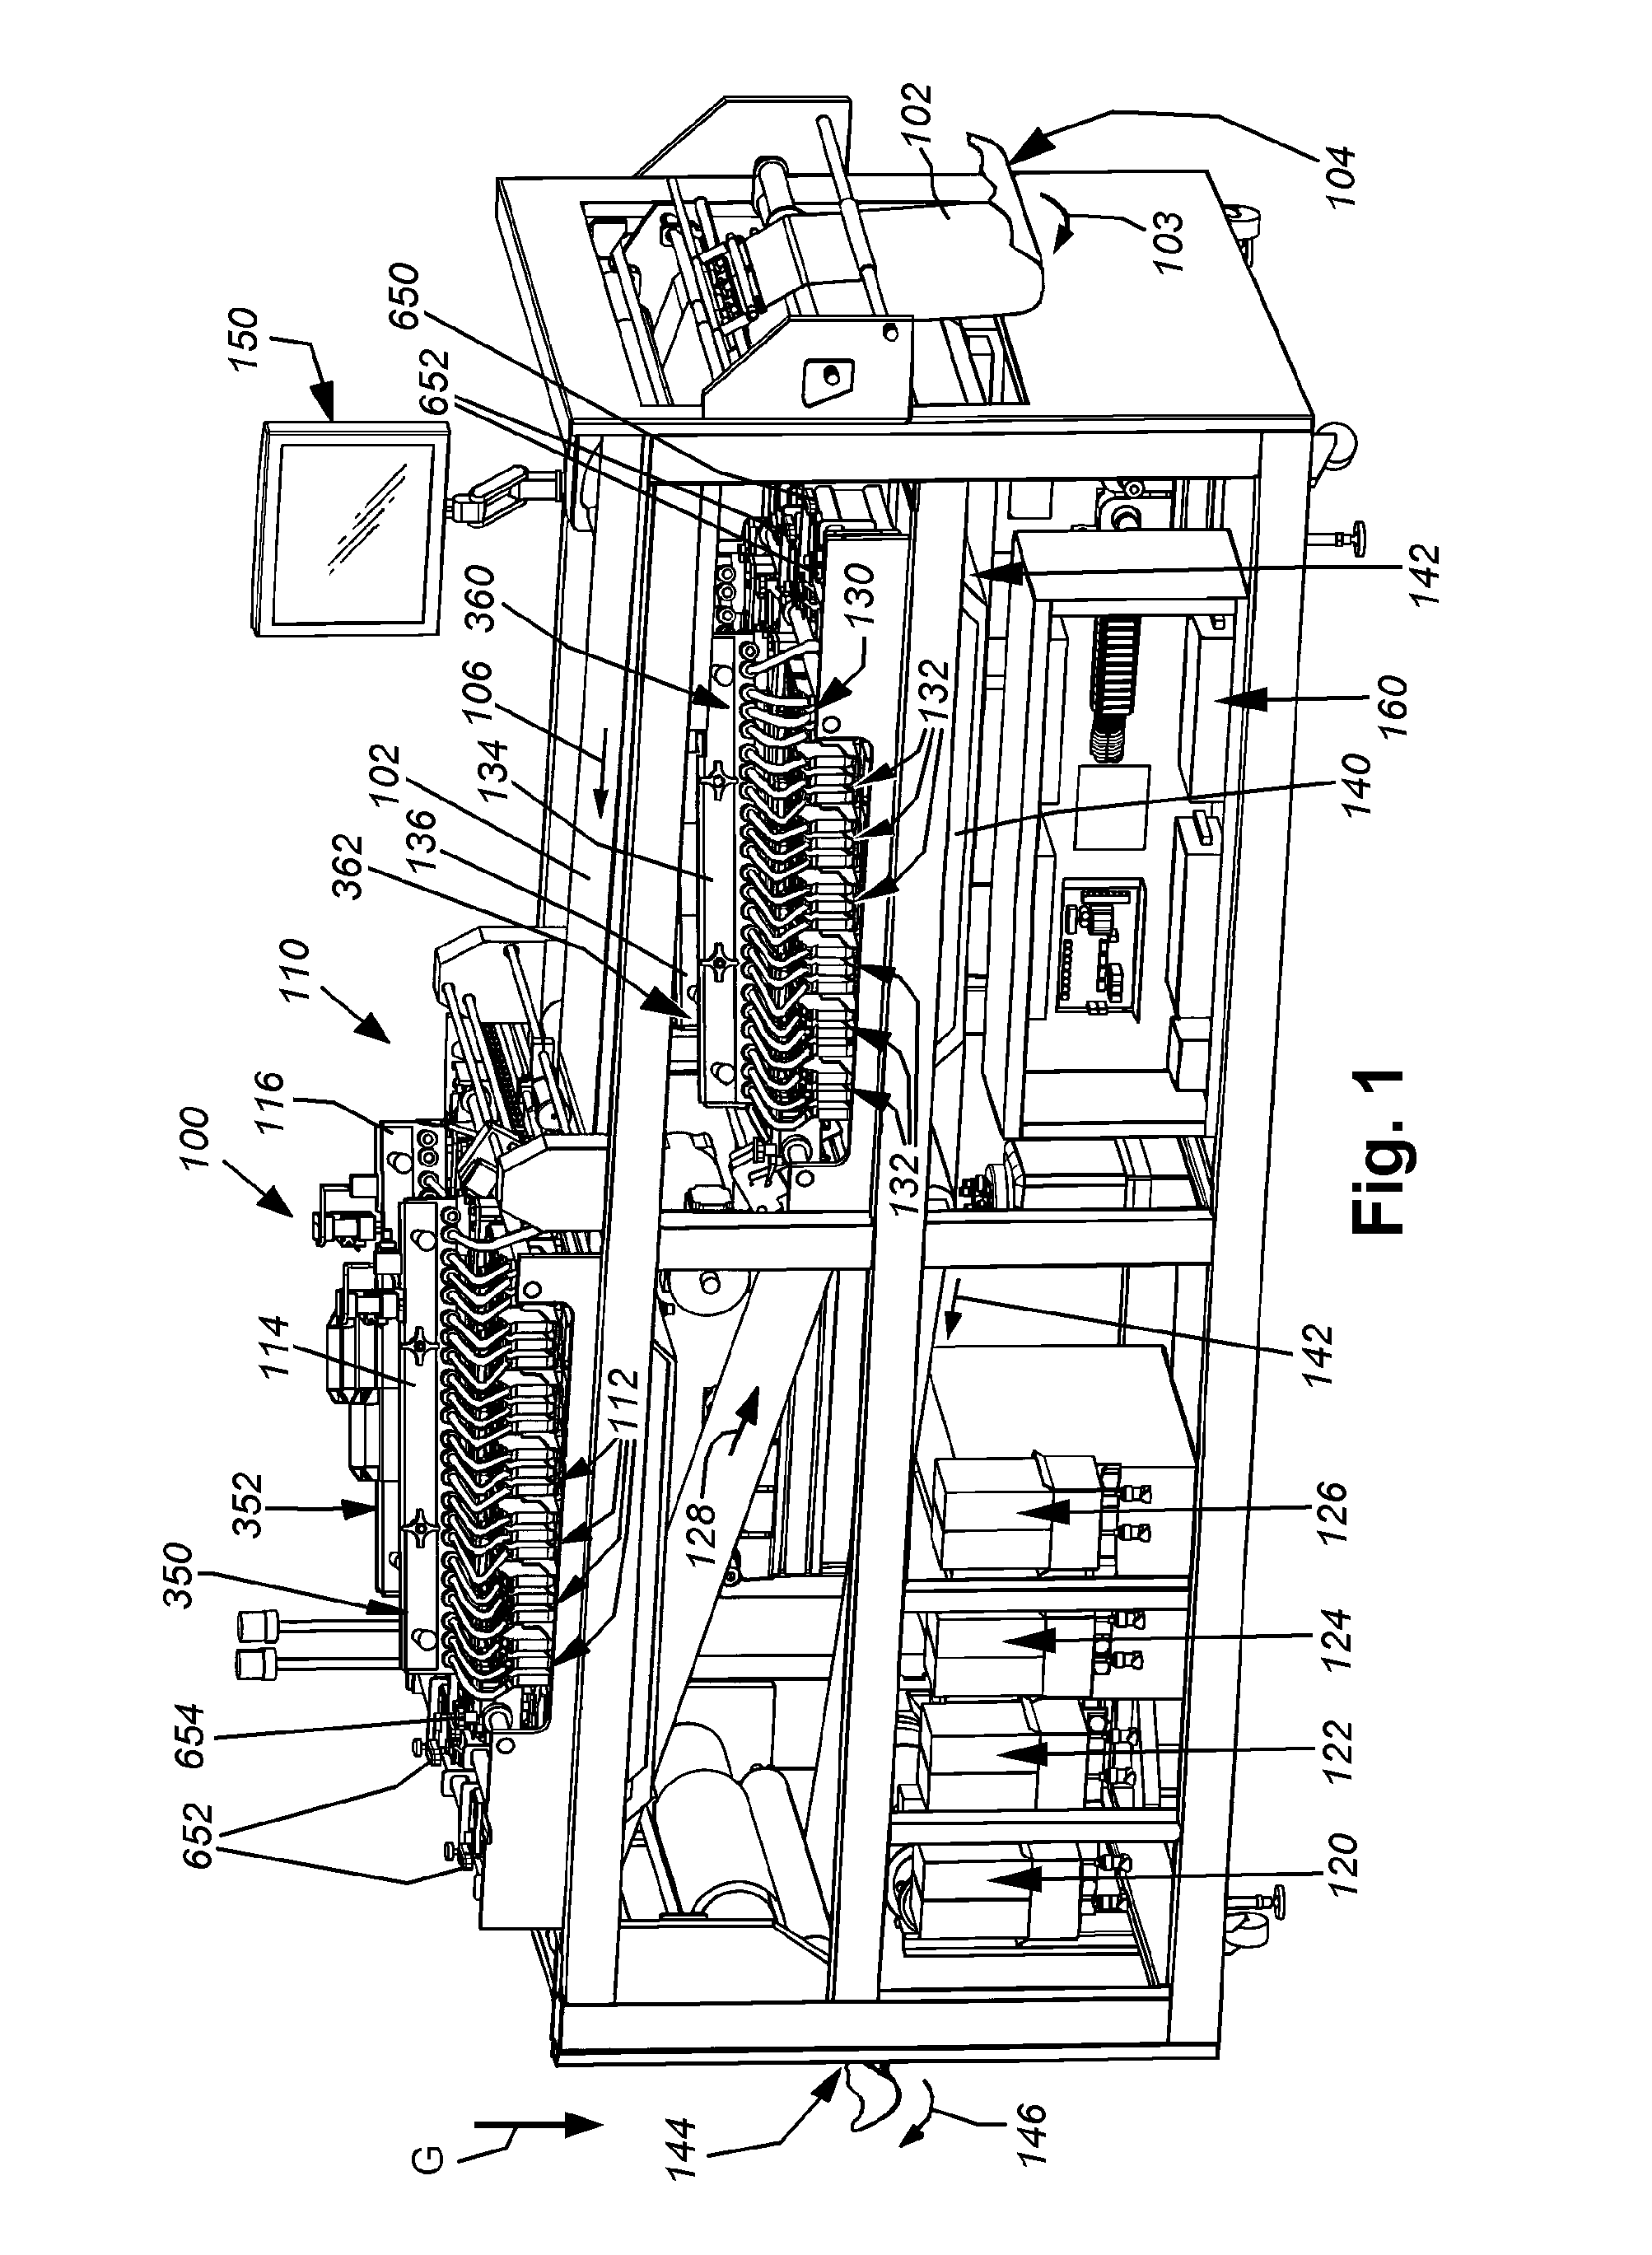 System and method for printing a continuous web employing a plurality of interleaved ink-jet pens fed by a bulk ink source